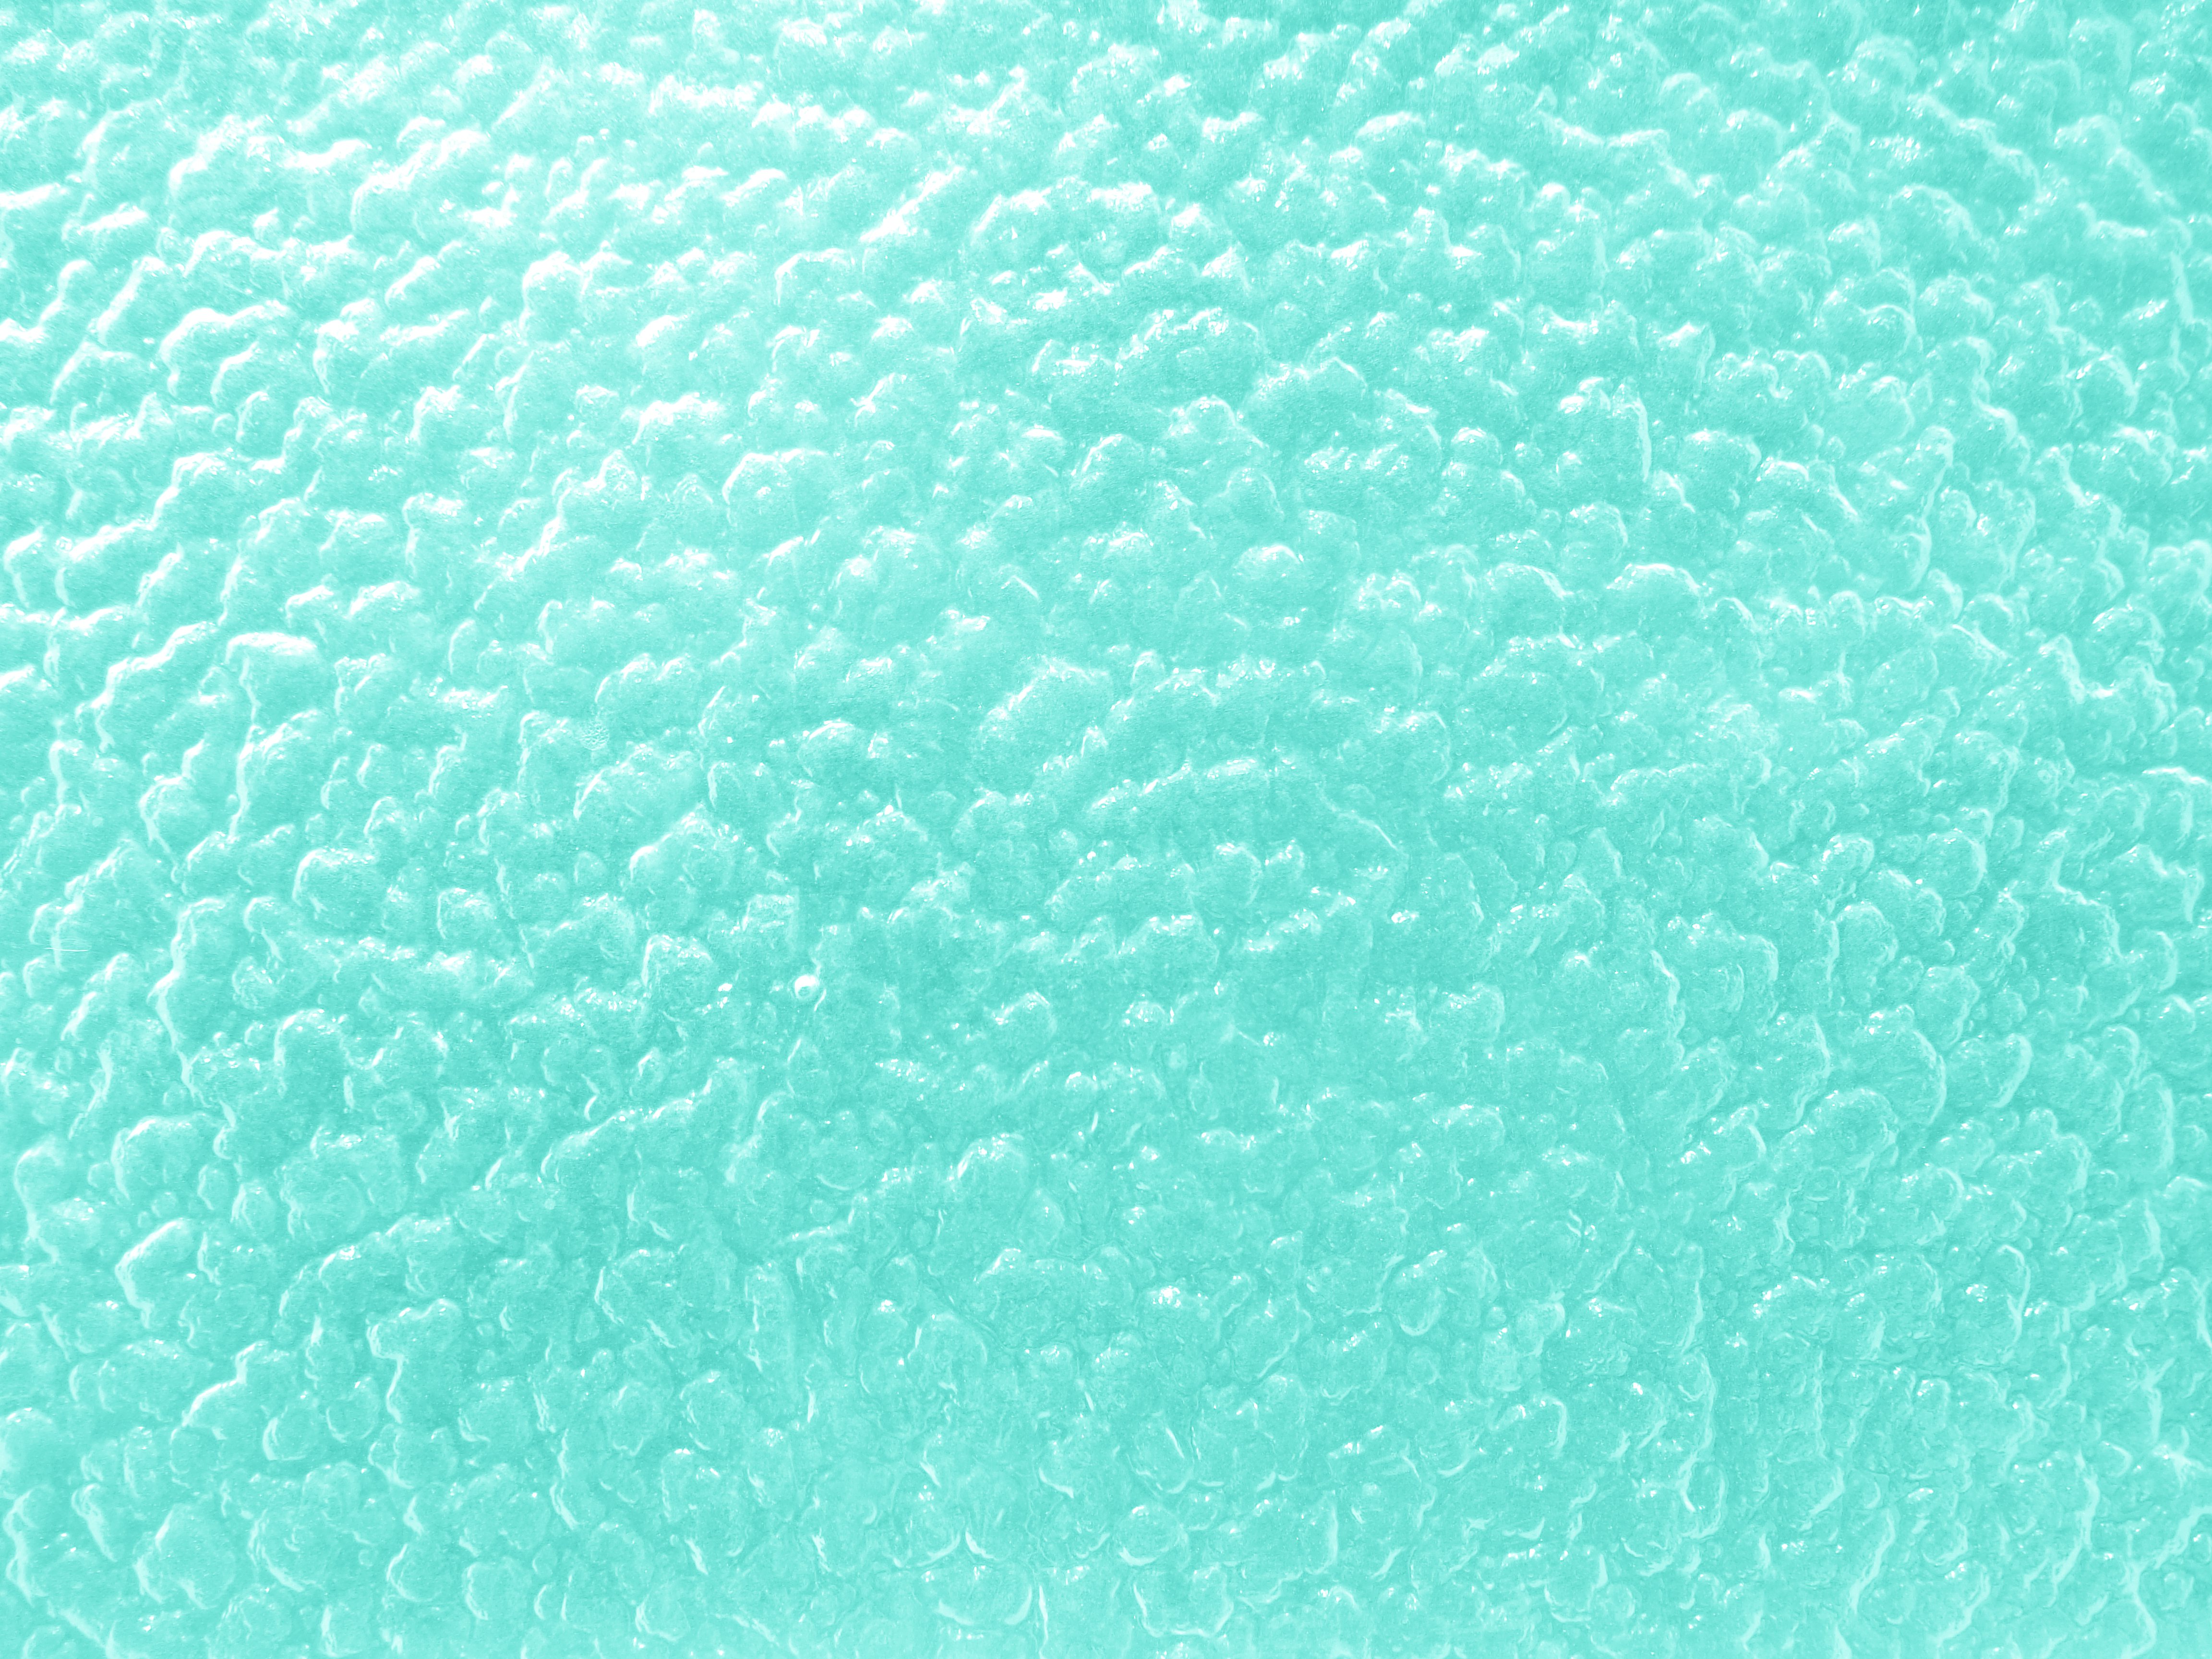 200+] Turquoise Background s | Wallpapers.com